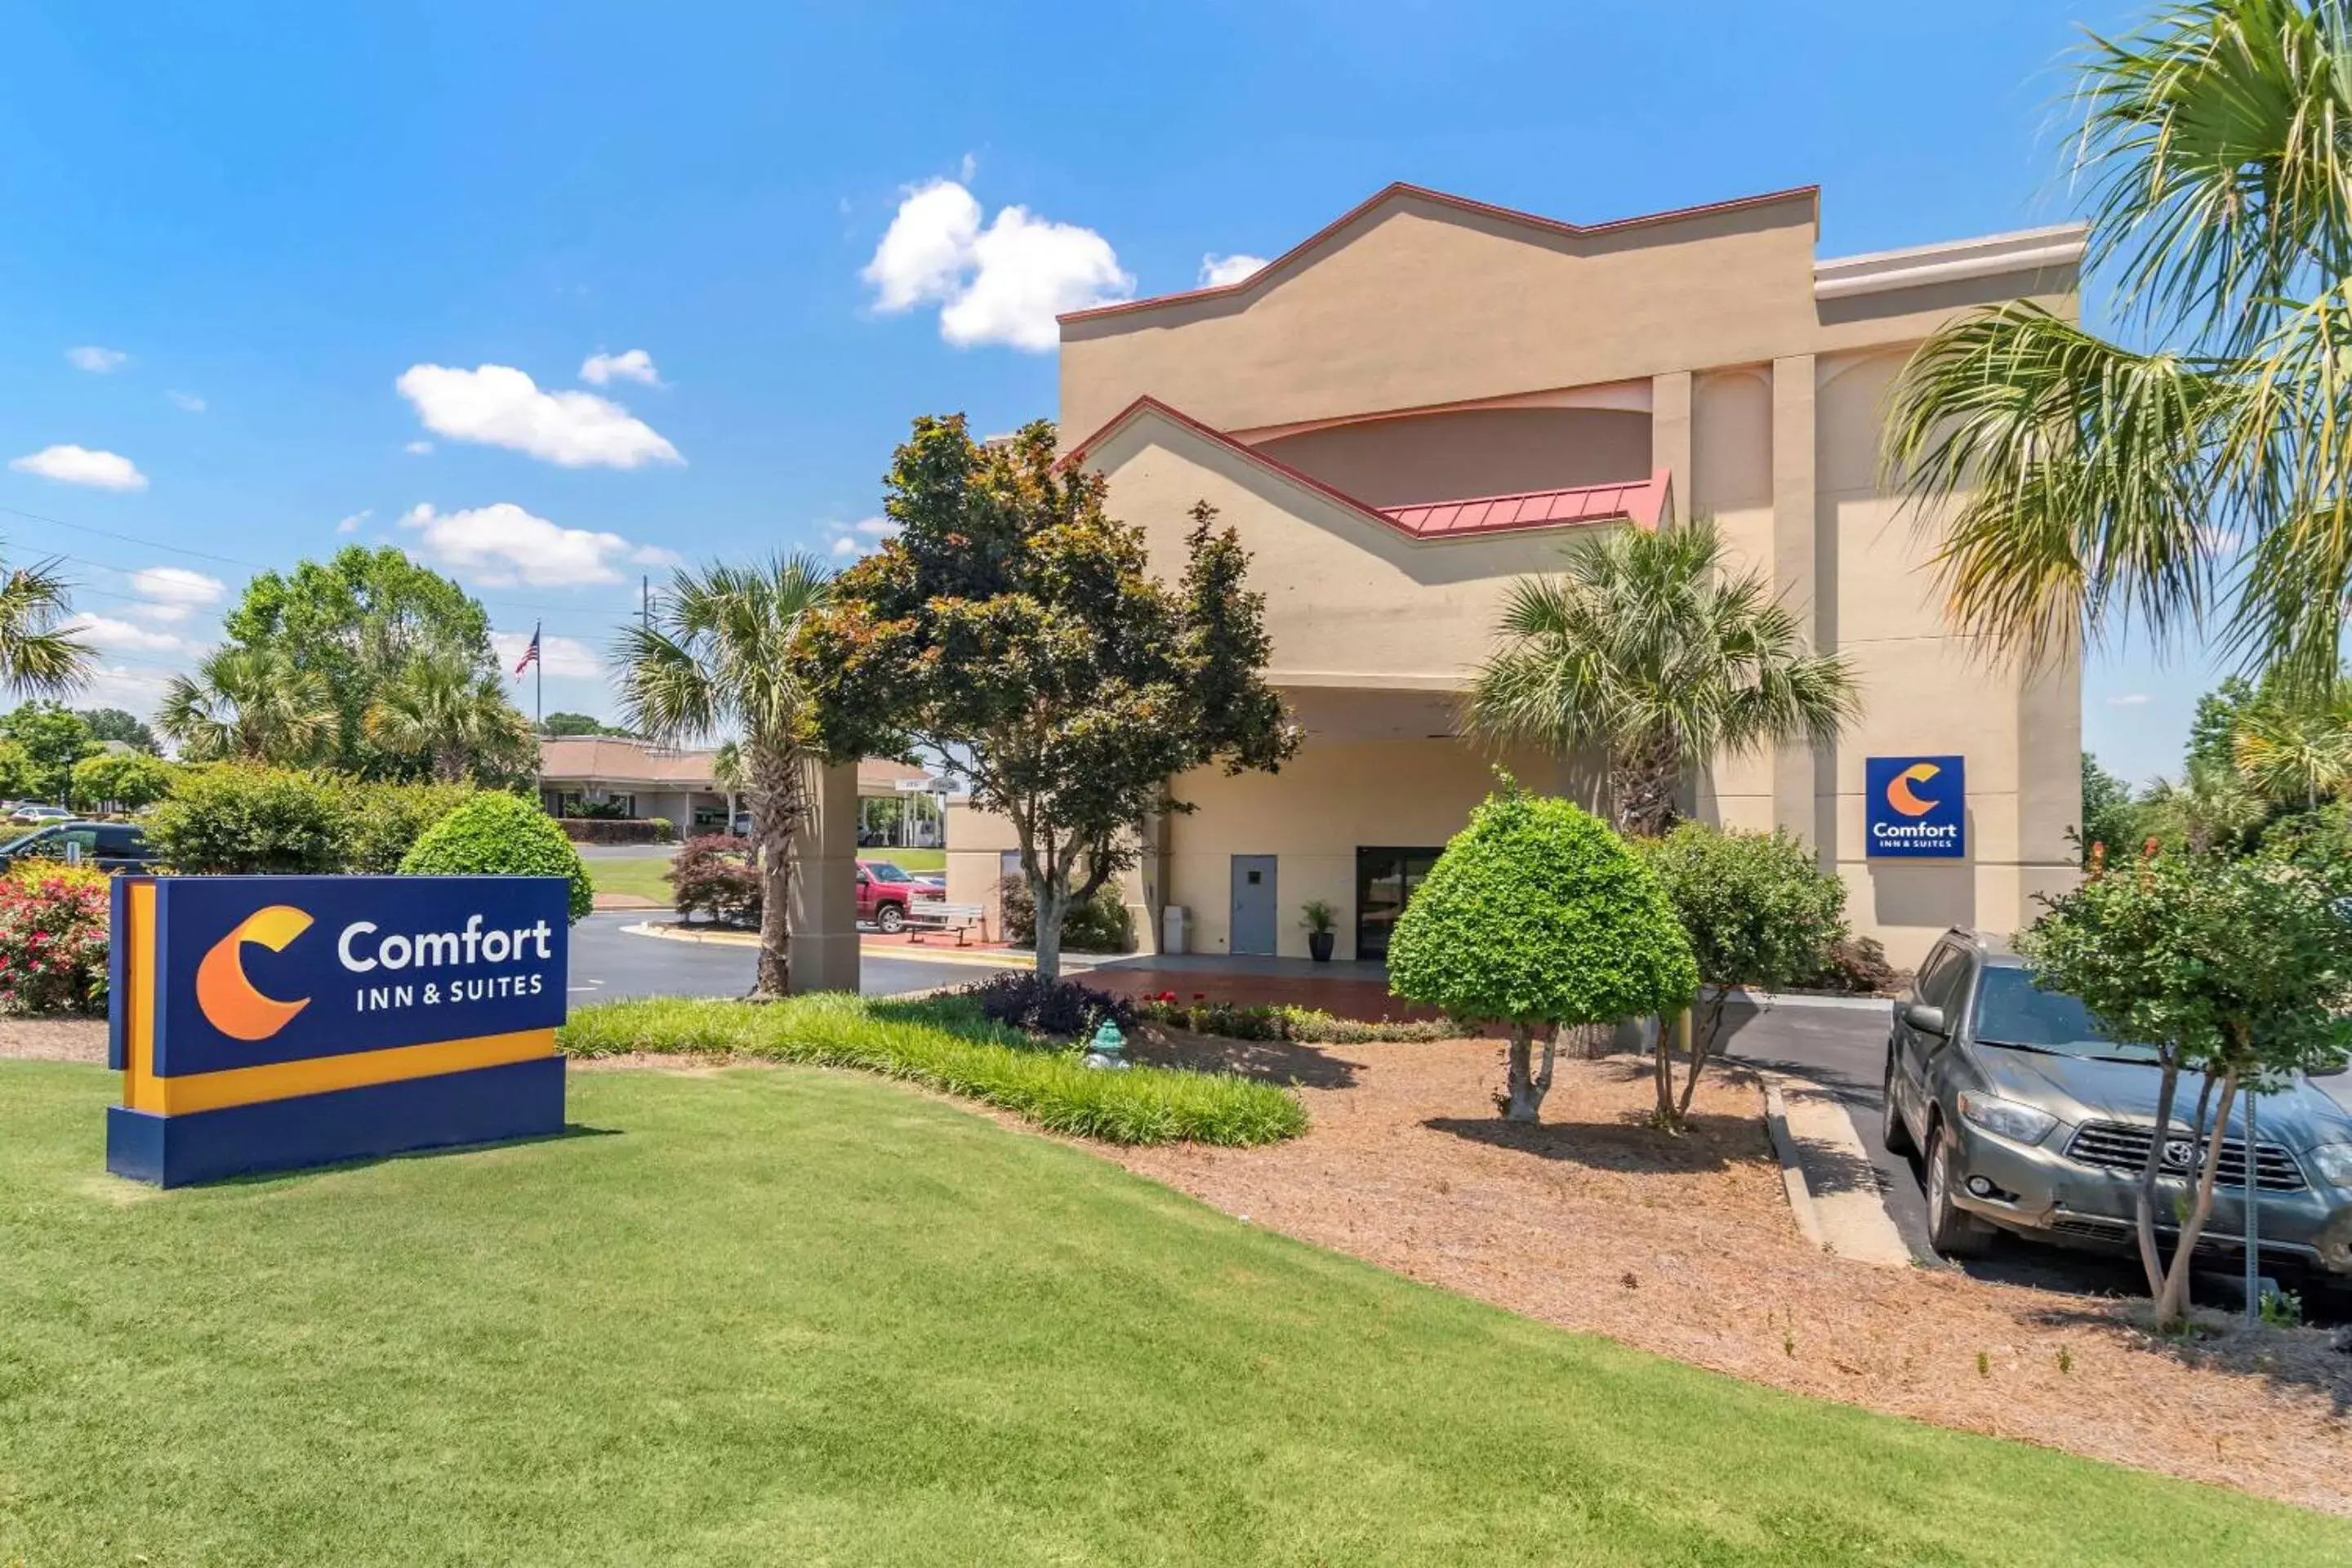 Property Building in Comfort Inn & Suites Athens